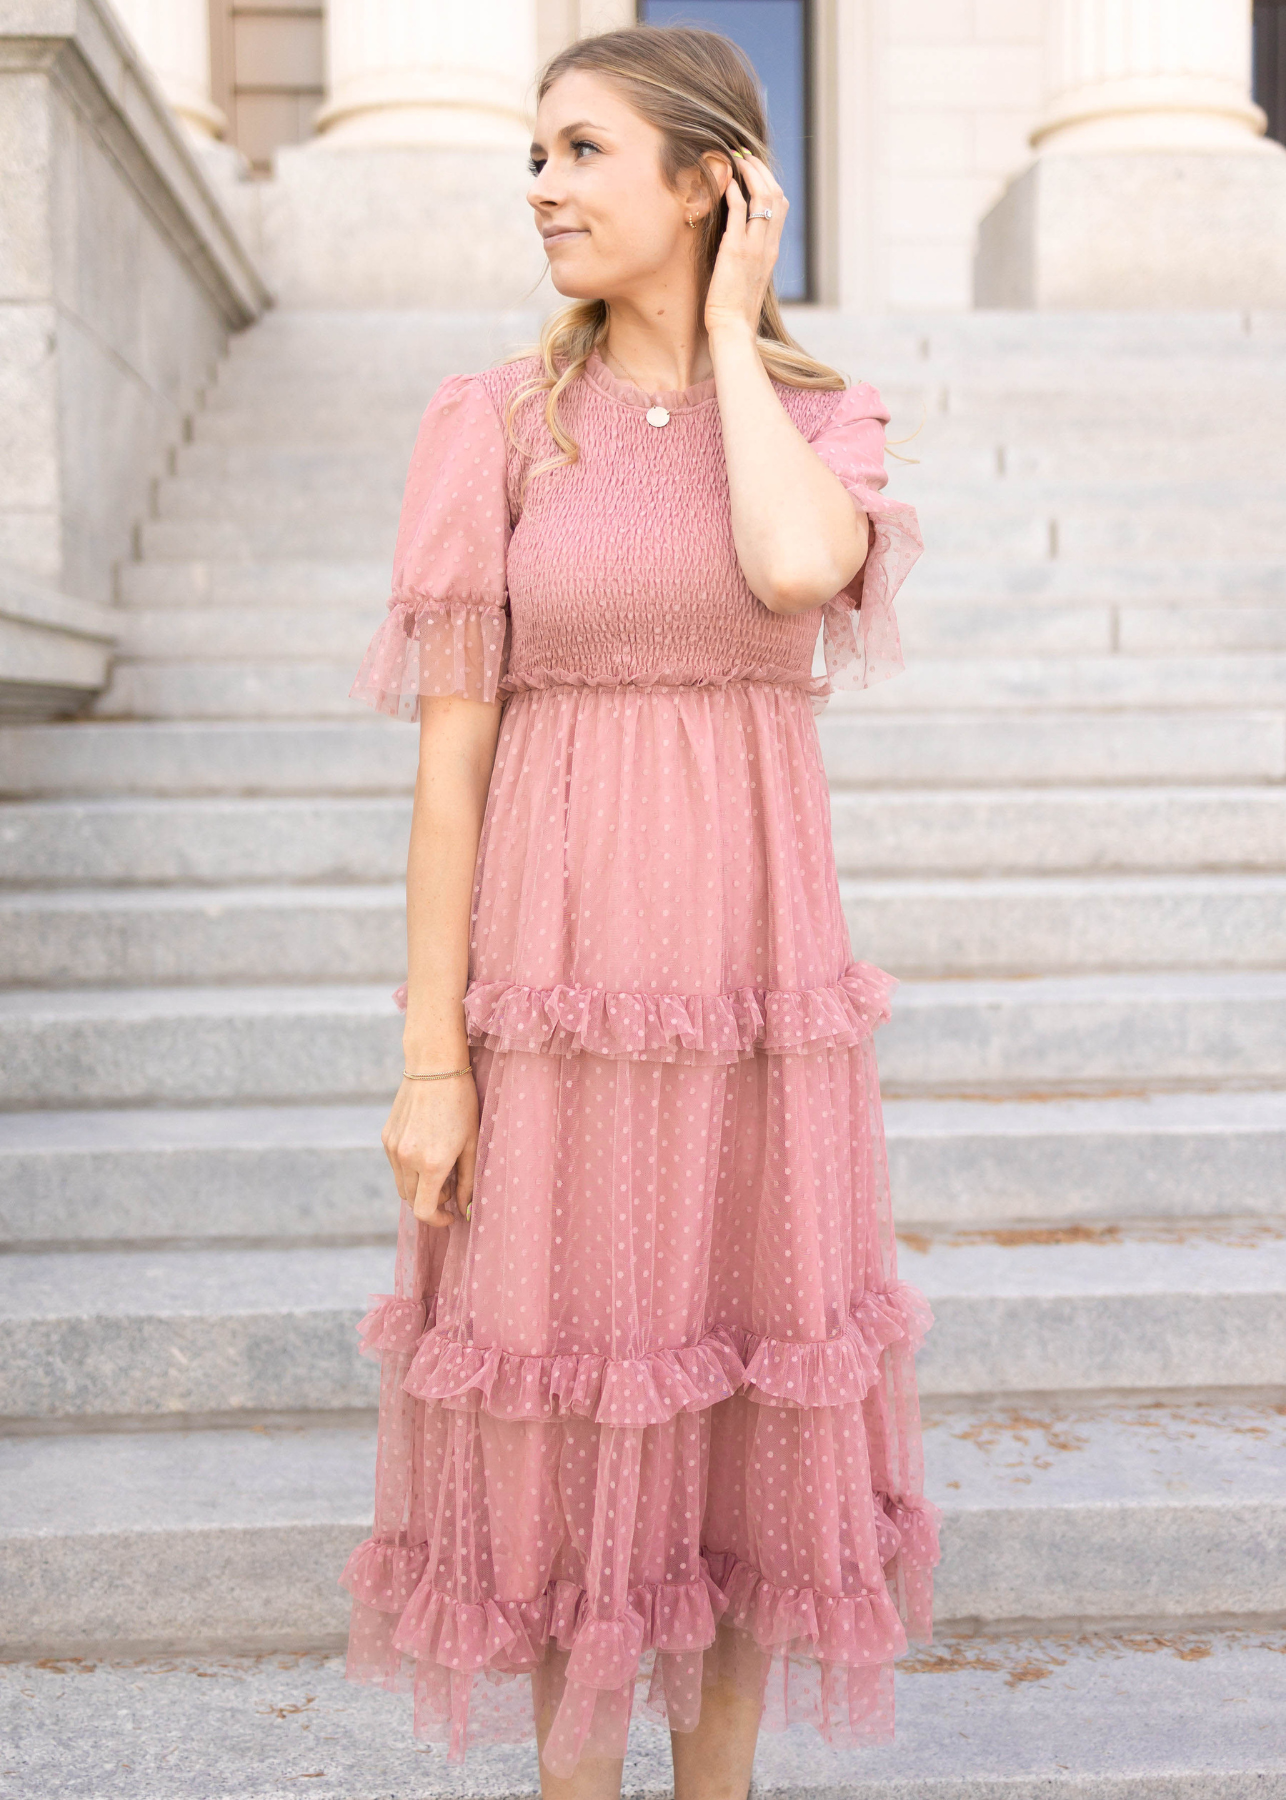 Dusty pink dress with ruffle skirt